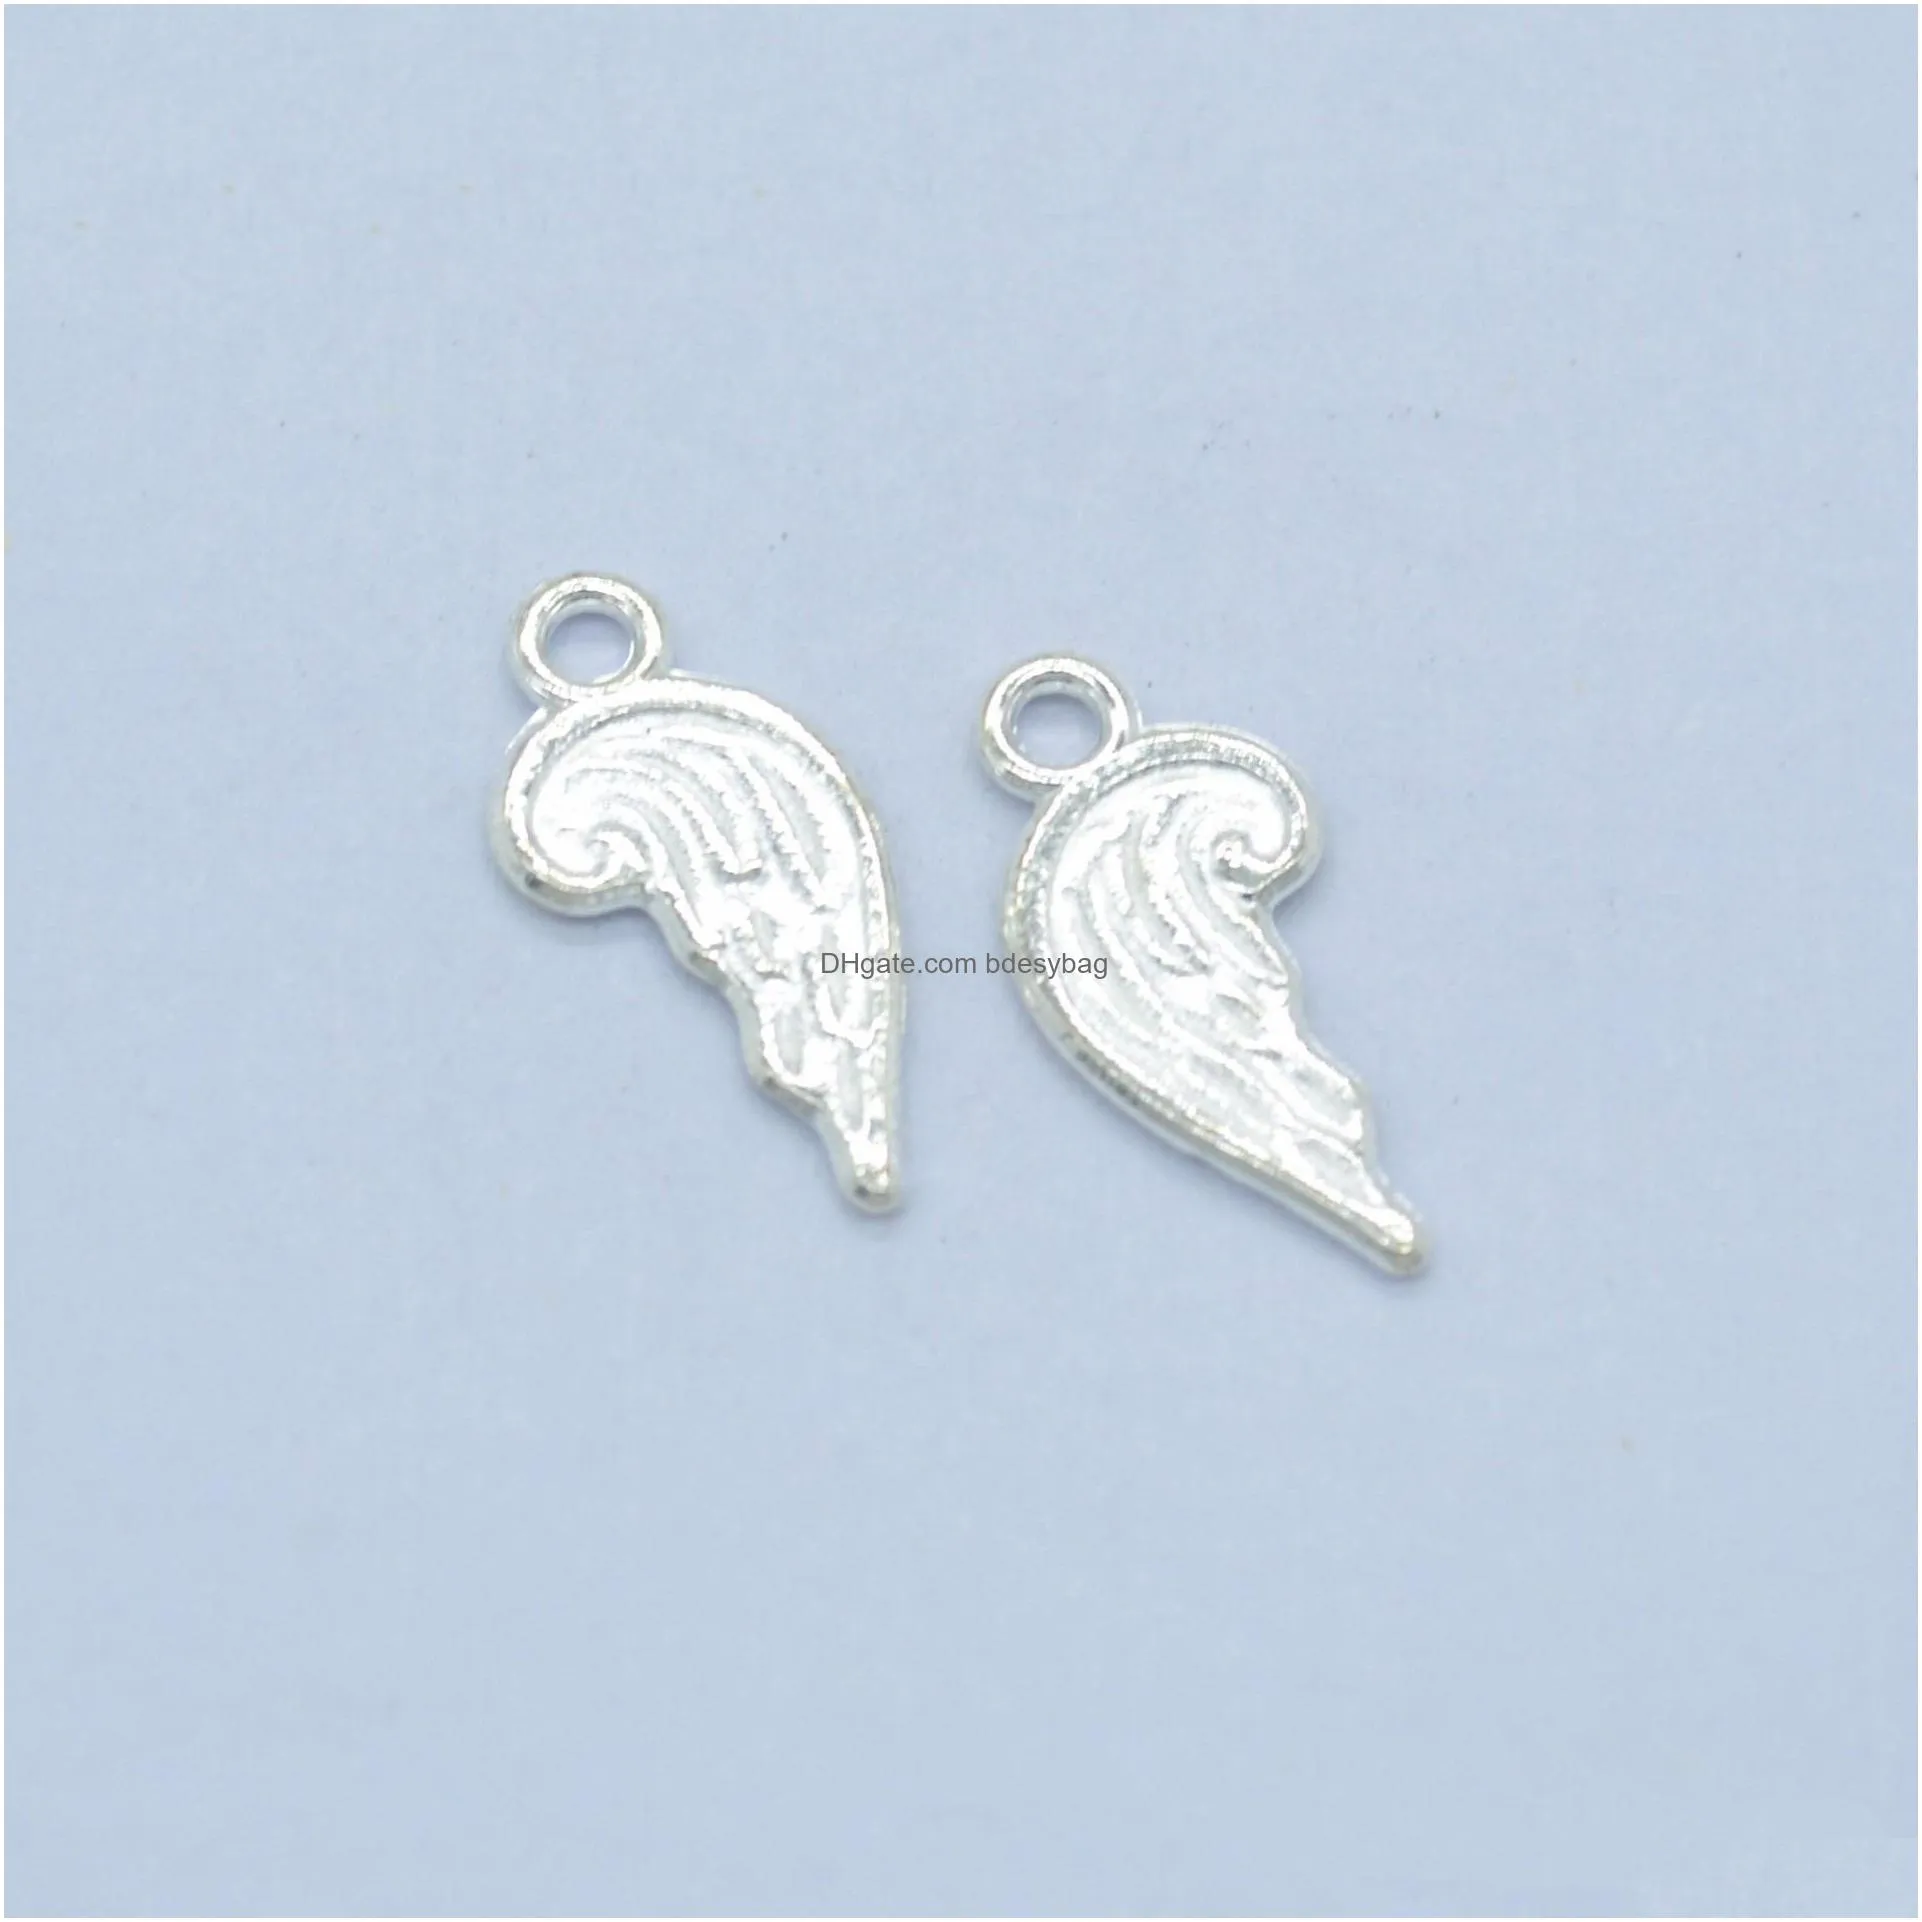 1000 pcs /lot little angel wing charms pendant 18x8 mm good for diy craft jewelry making